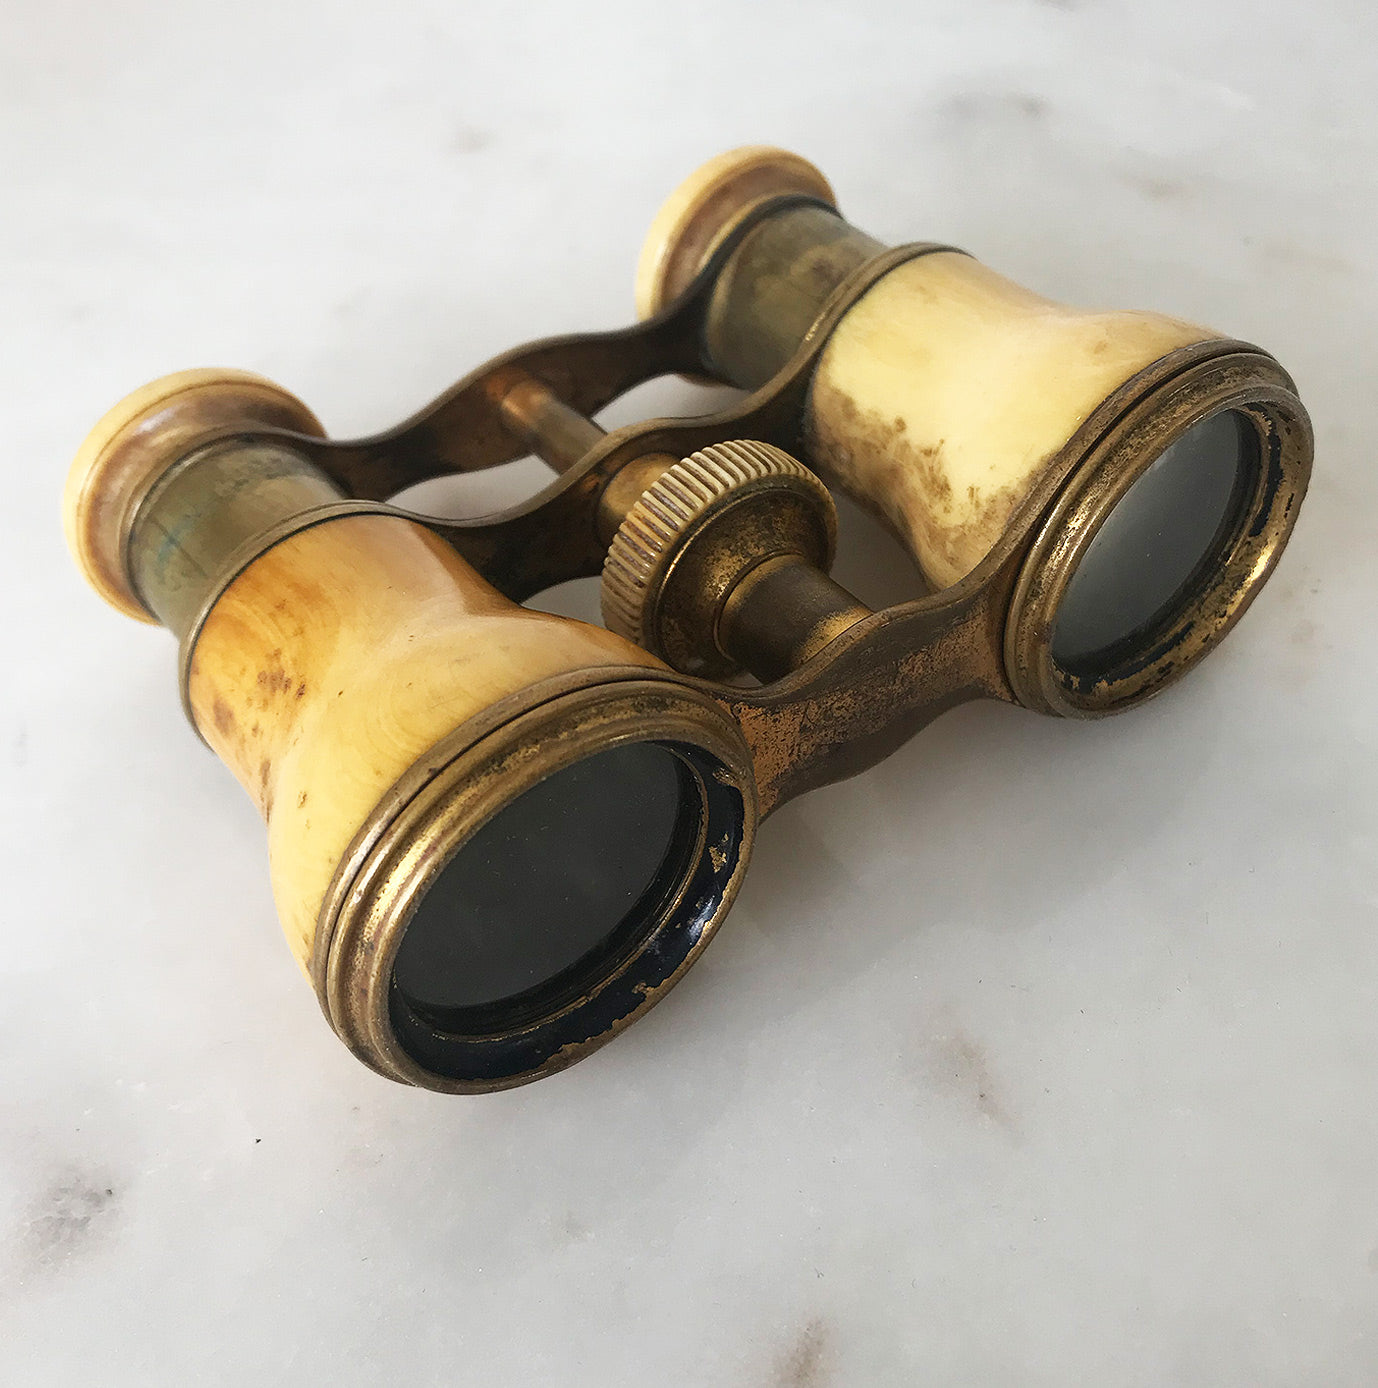 Nice little pair of Vintage Bone and Brass Opera Glasses - SHOP NOW - www.intovintage.co.uk